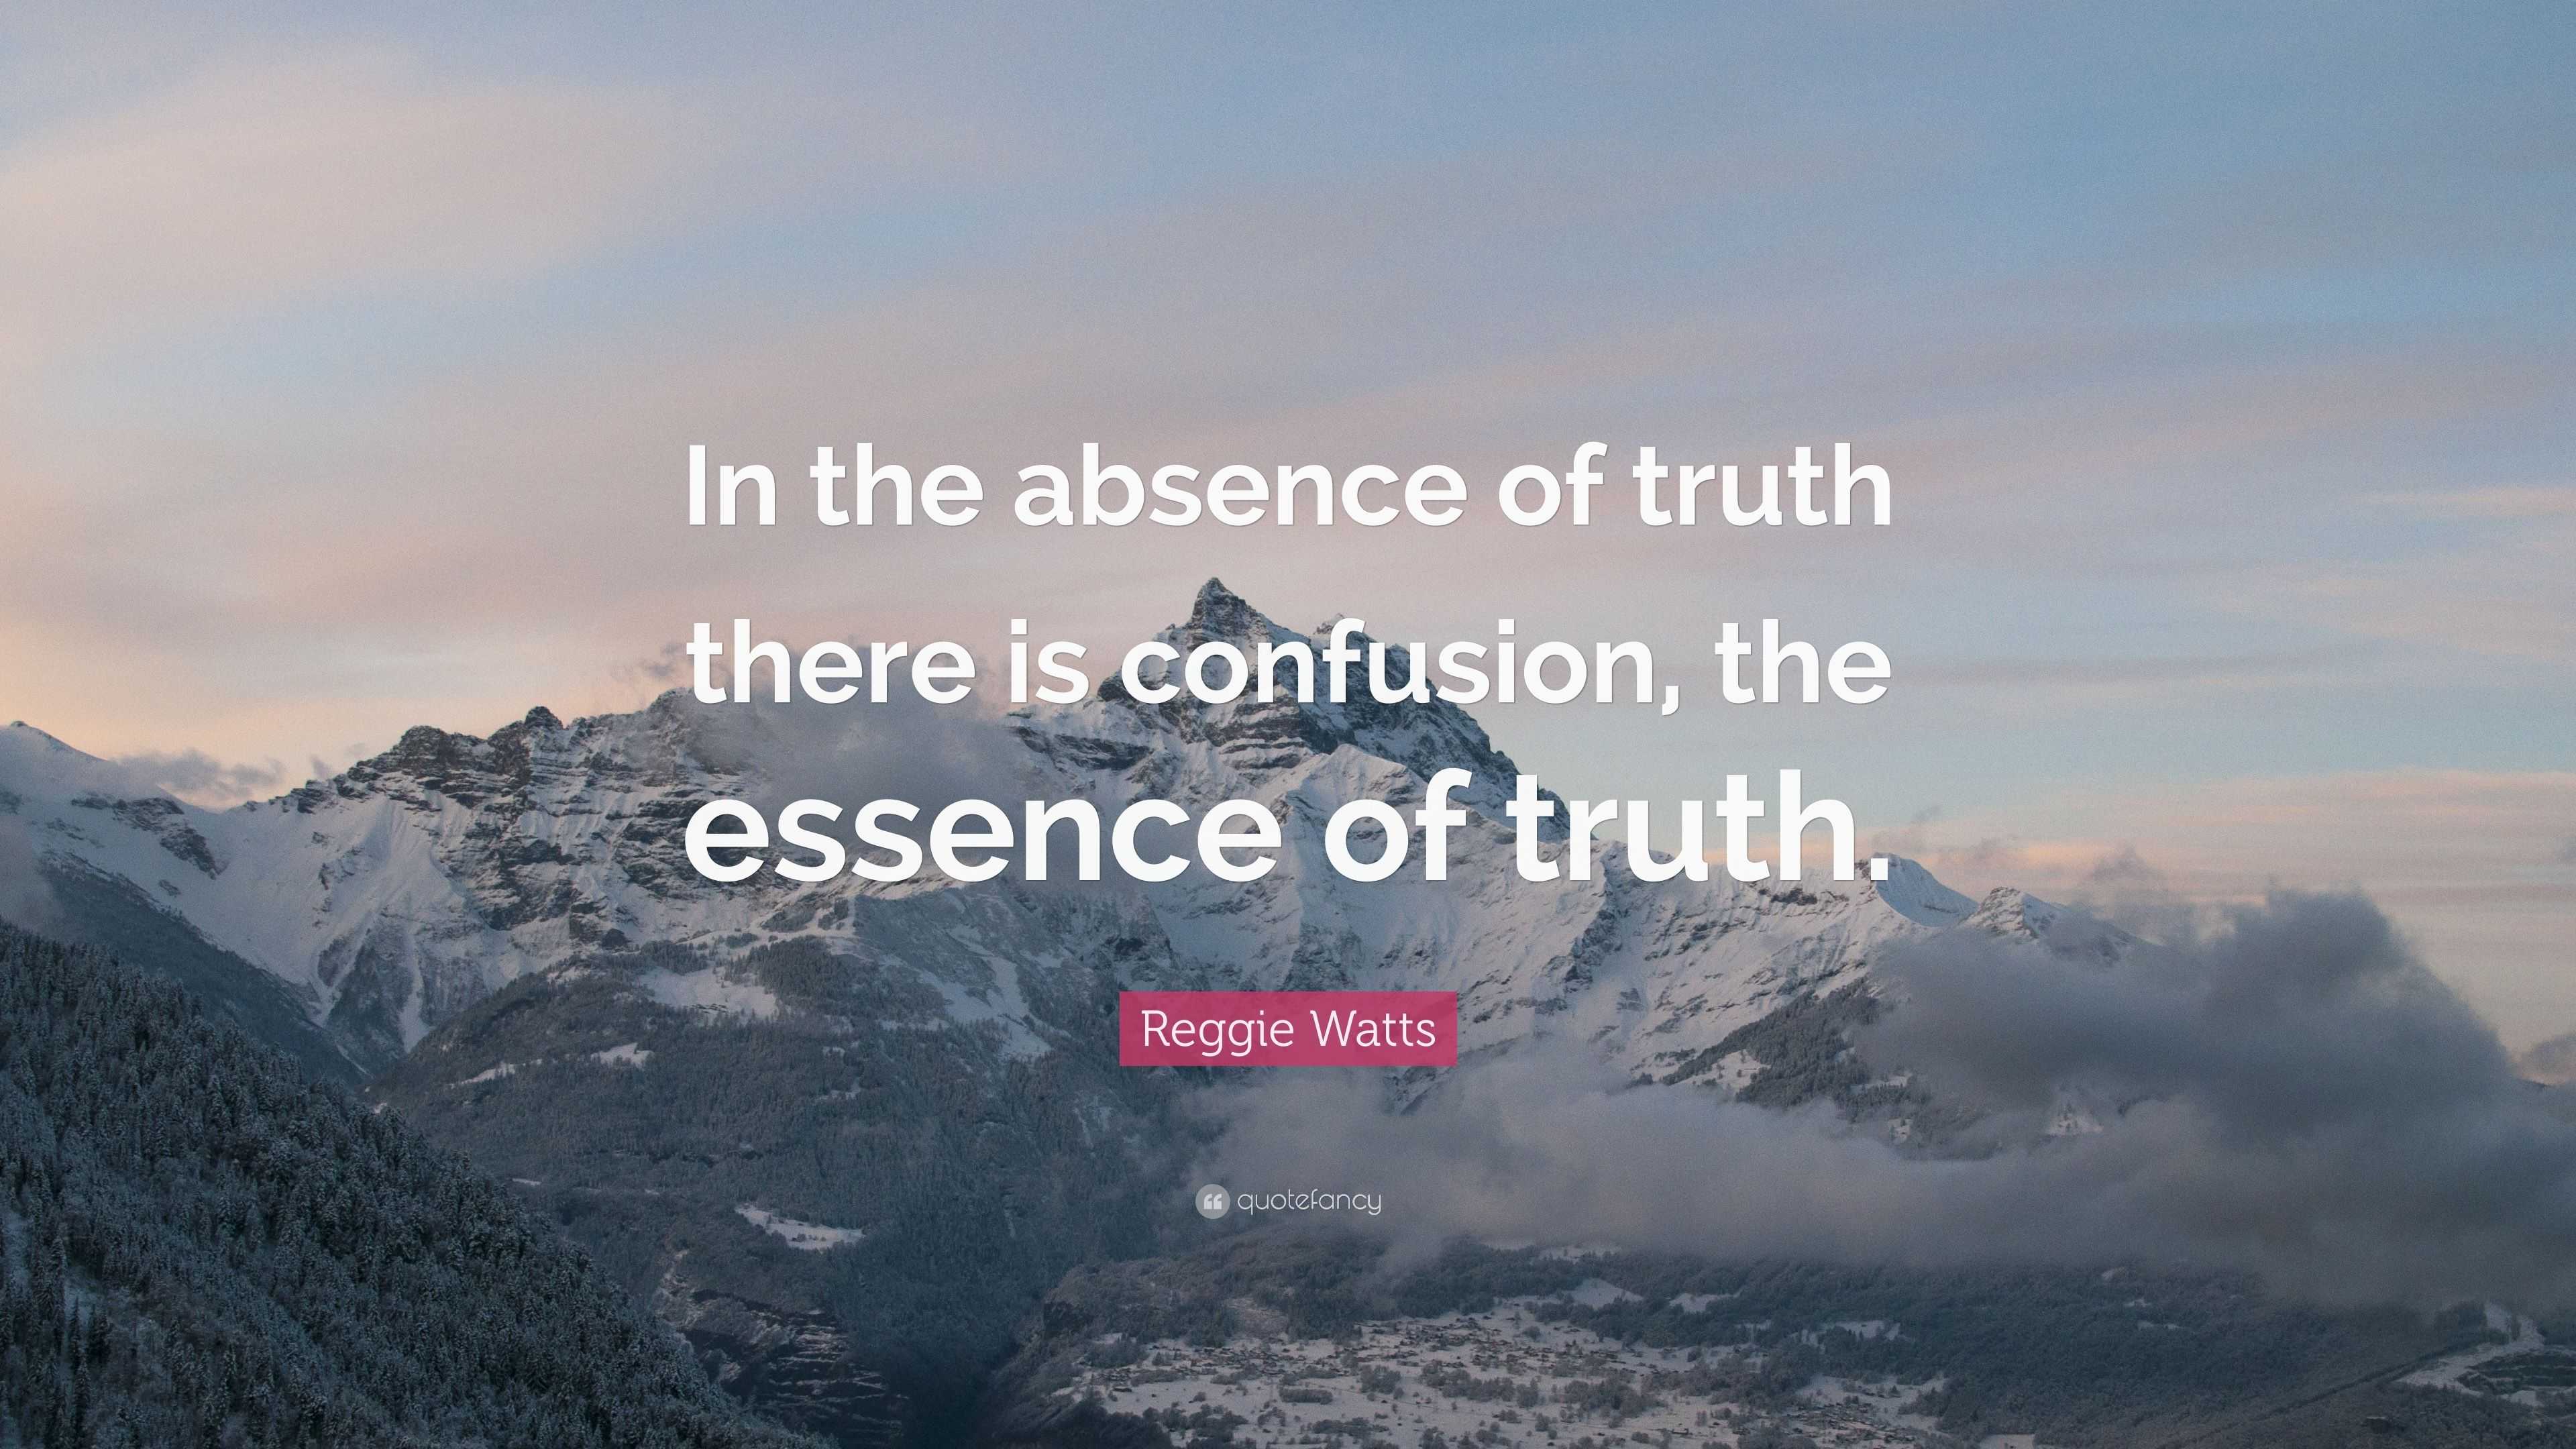 Reggie Watts Quote In The Absence Of Truth There Is Confusion The Essence Of Truth 7 Wallpapers Quotefancy